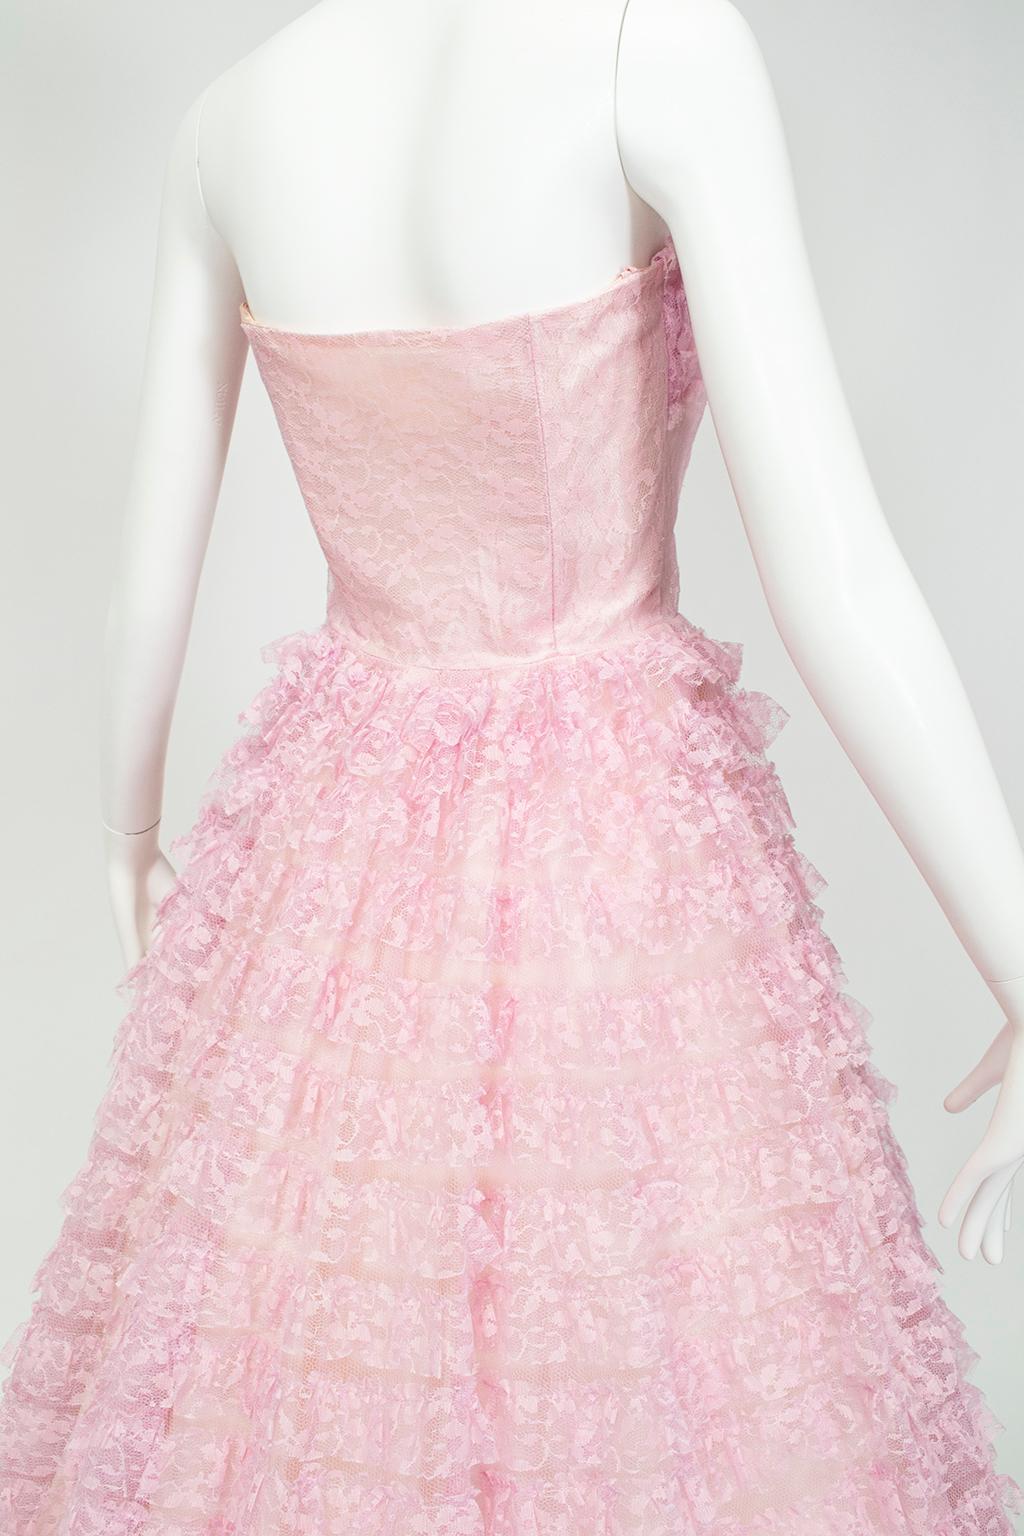 Pink-Lavender New Look Strapless Tiered Lace Ballerina Party Dress – S-M, 1950s For Sale 3